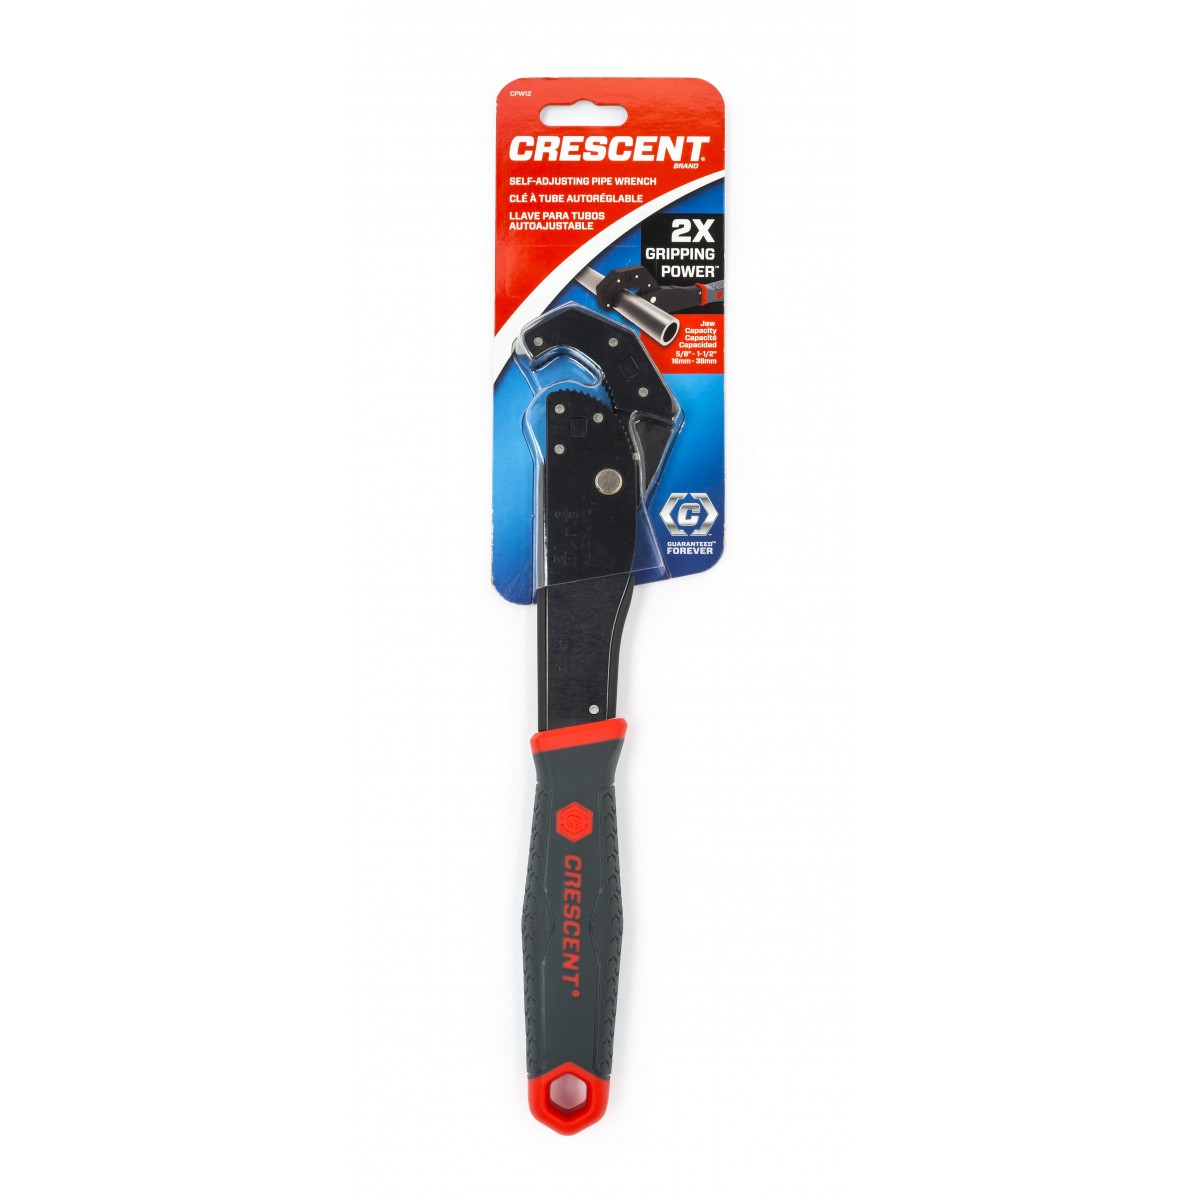 buy pliers, cutters & wrenches at cheap rate in bulk. wholesale & retail hand tool sets store. home décor ideas, maintenance, repair replacement parts